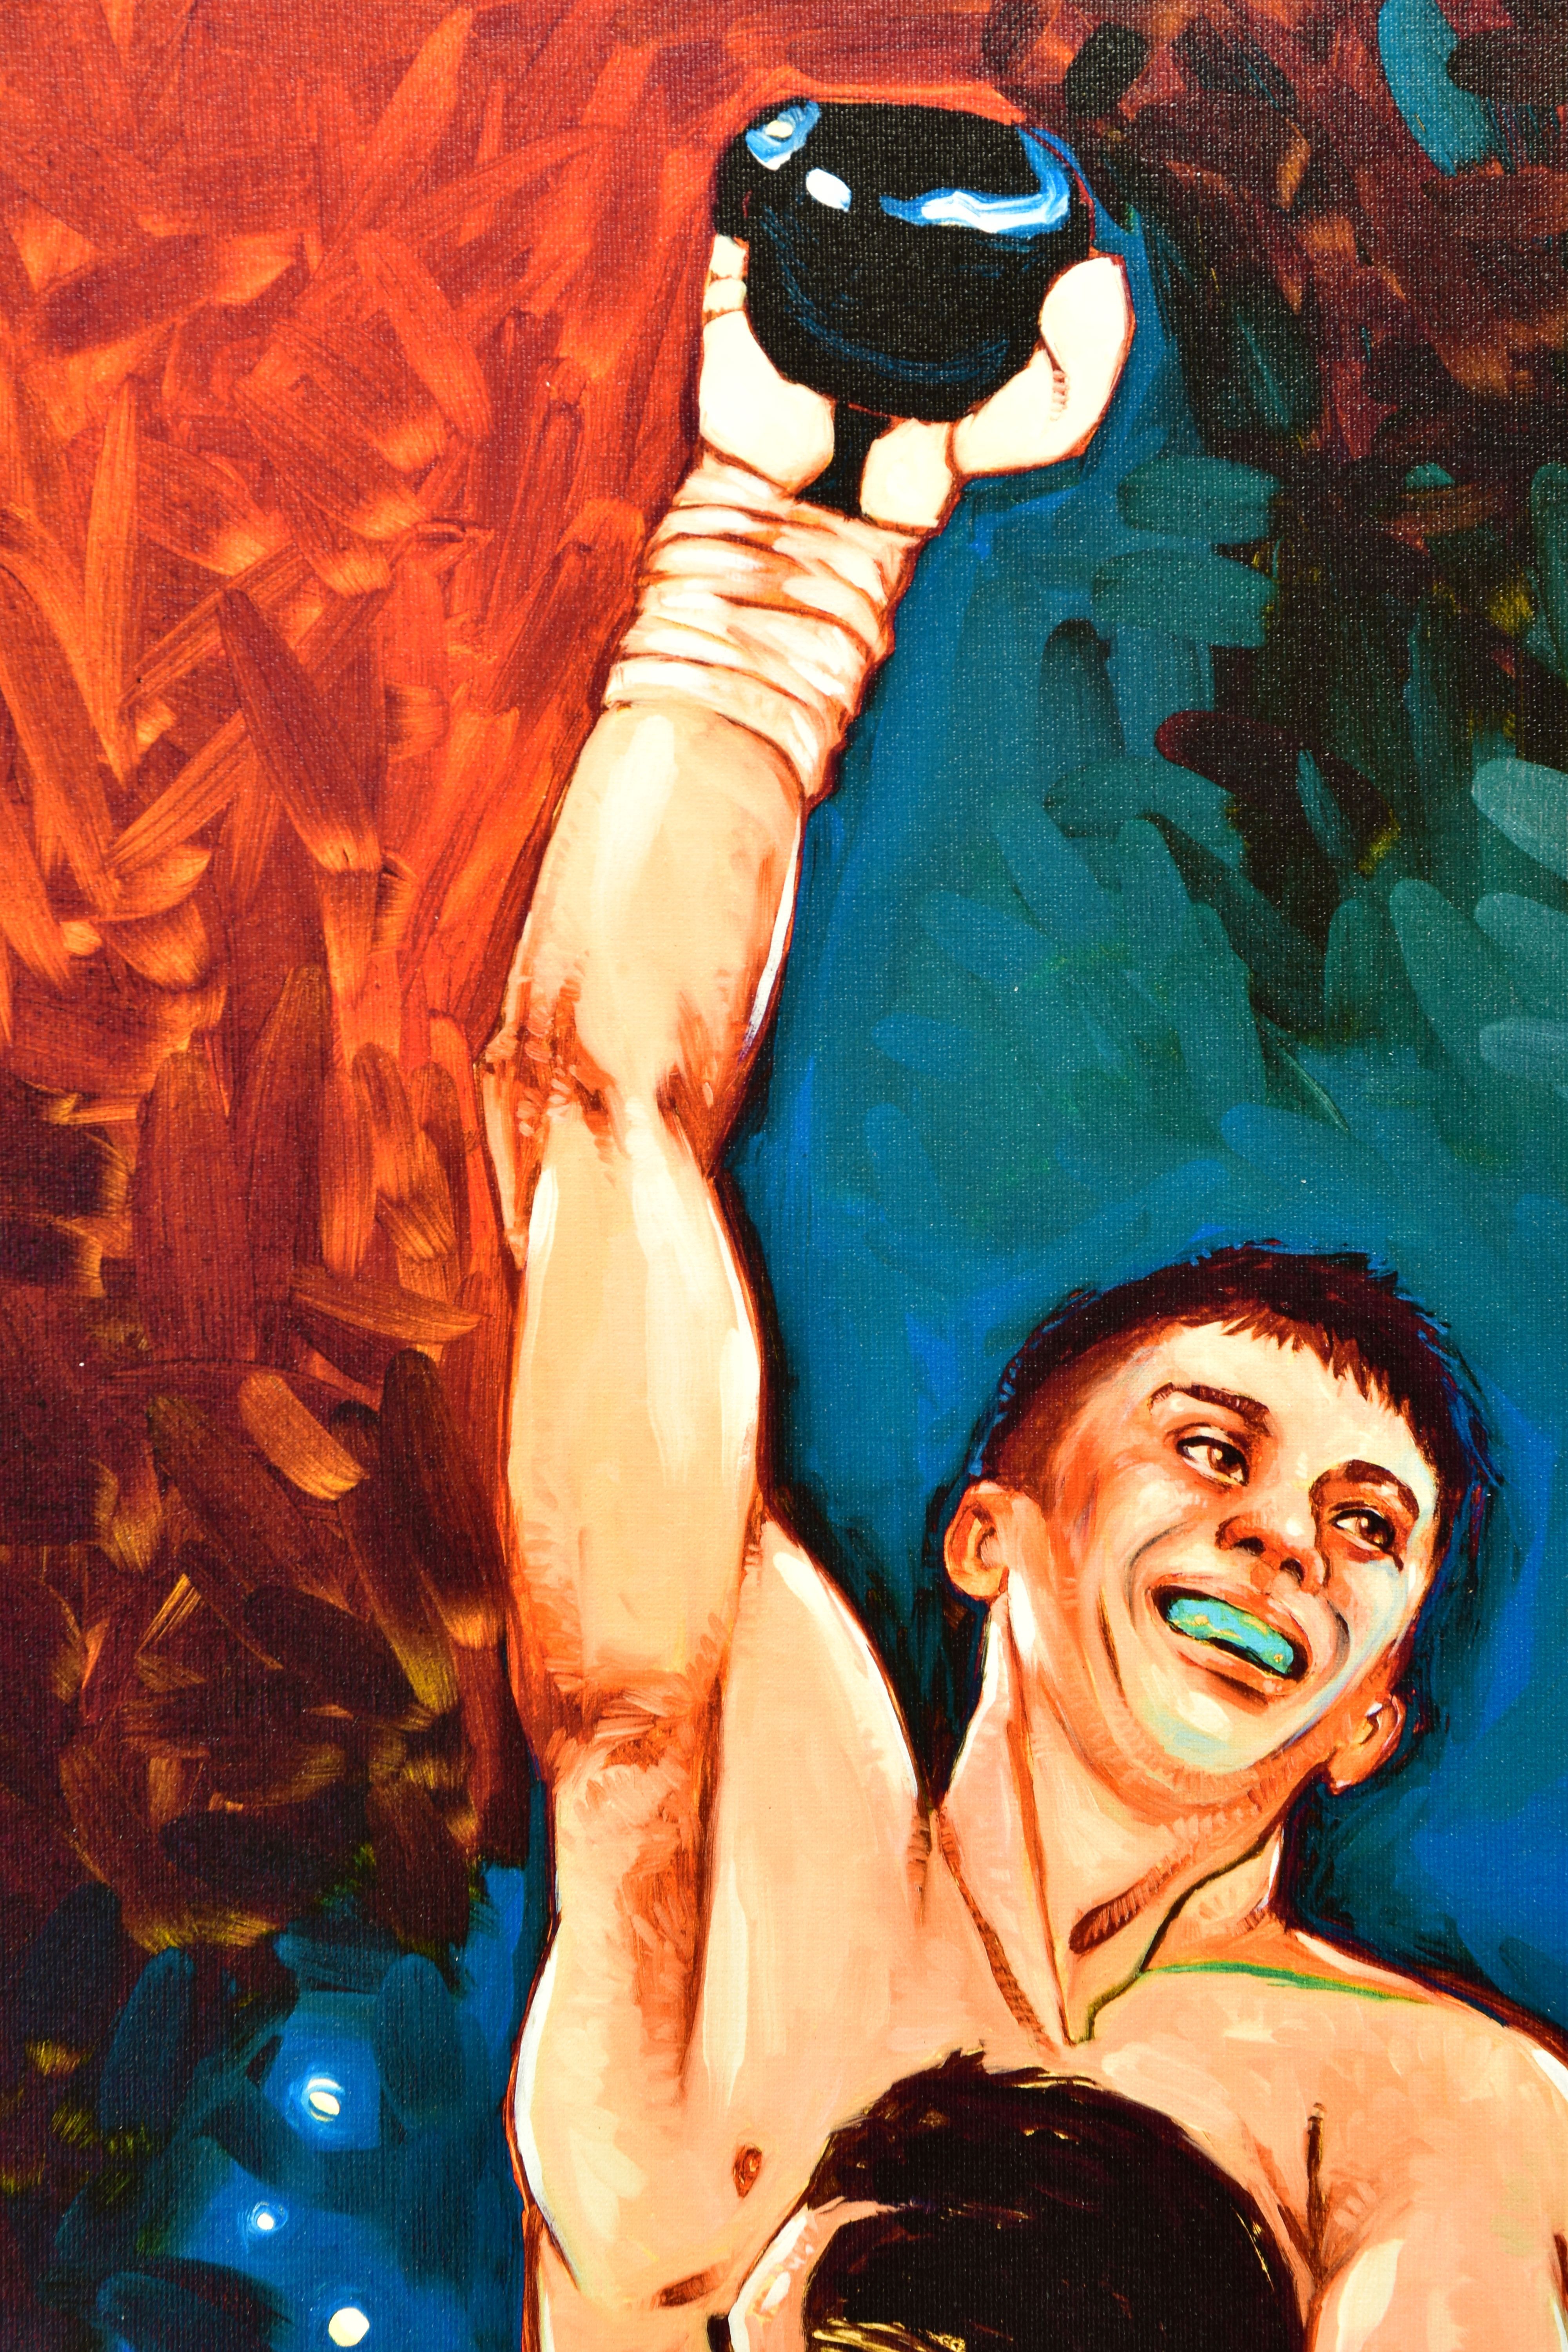 TODD WHITE (AMERICA 1969) 'VICTORY' a portrait of boxing champion Gennady Golovkin, limited - Image 3 of 10